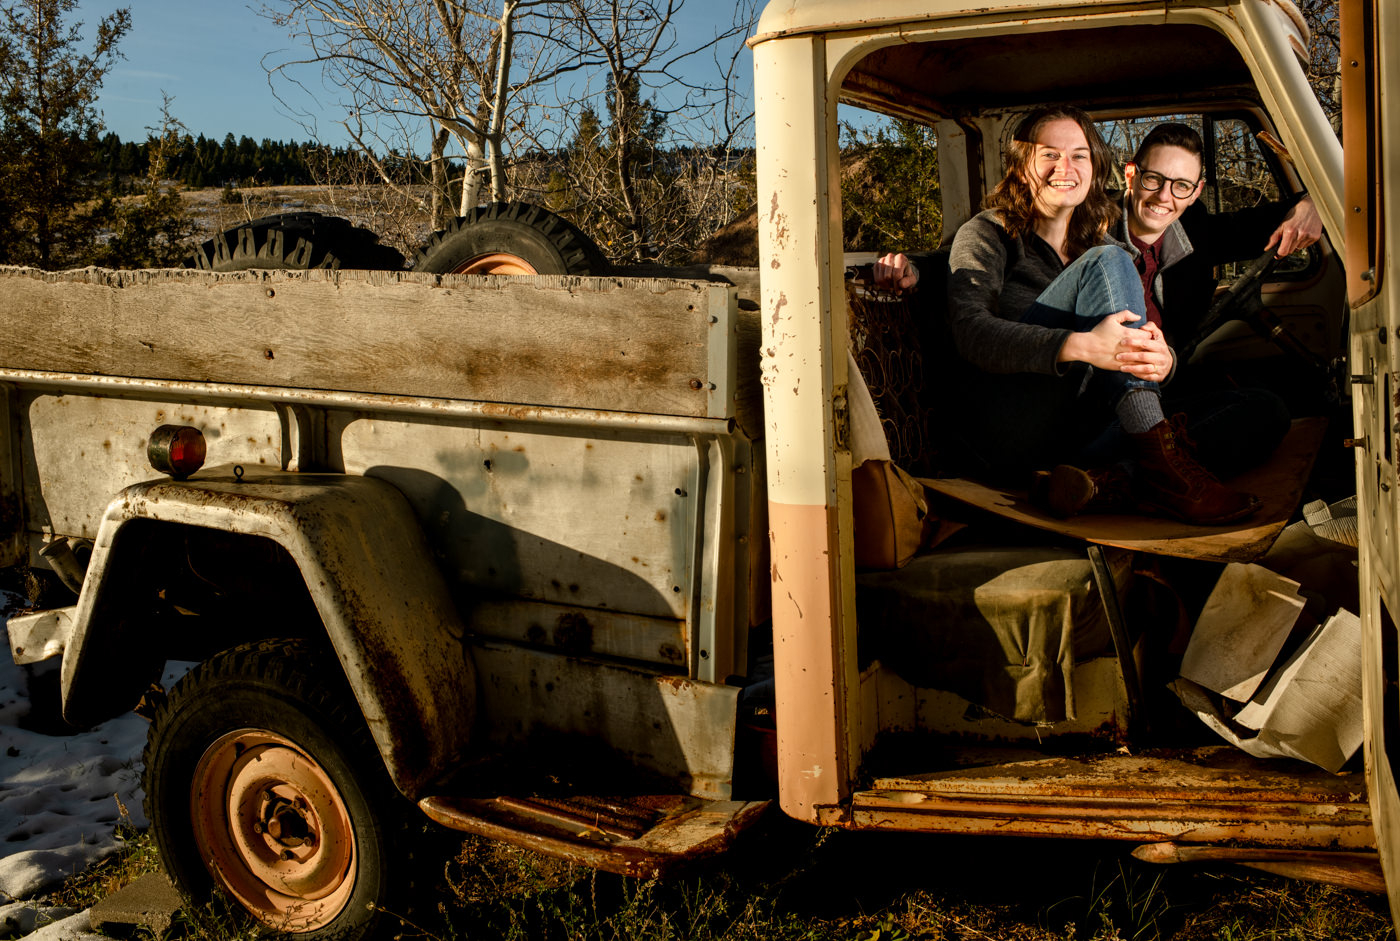 Rusty-Truck-Butte-MT-Couples-Portrait-Photography-Greener-Visuals